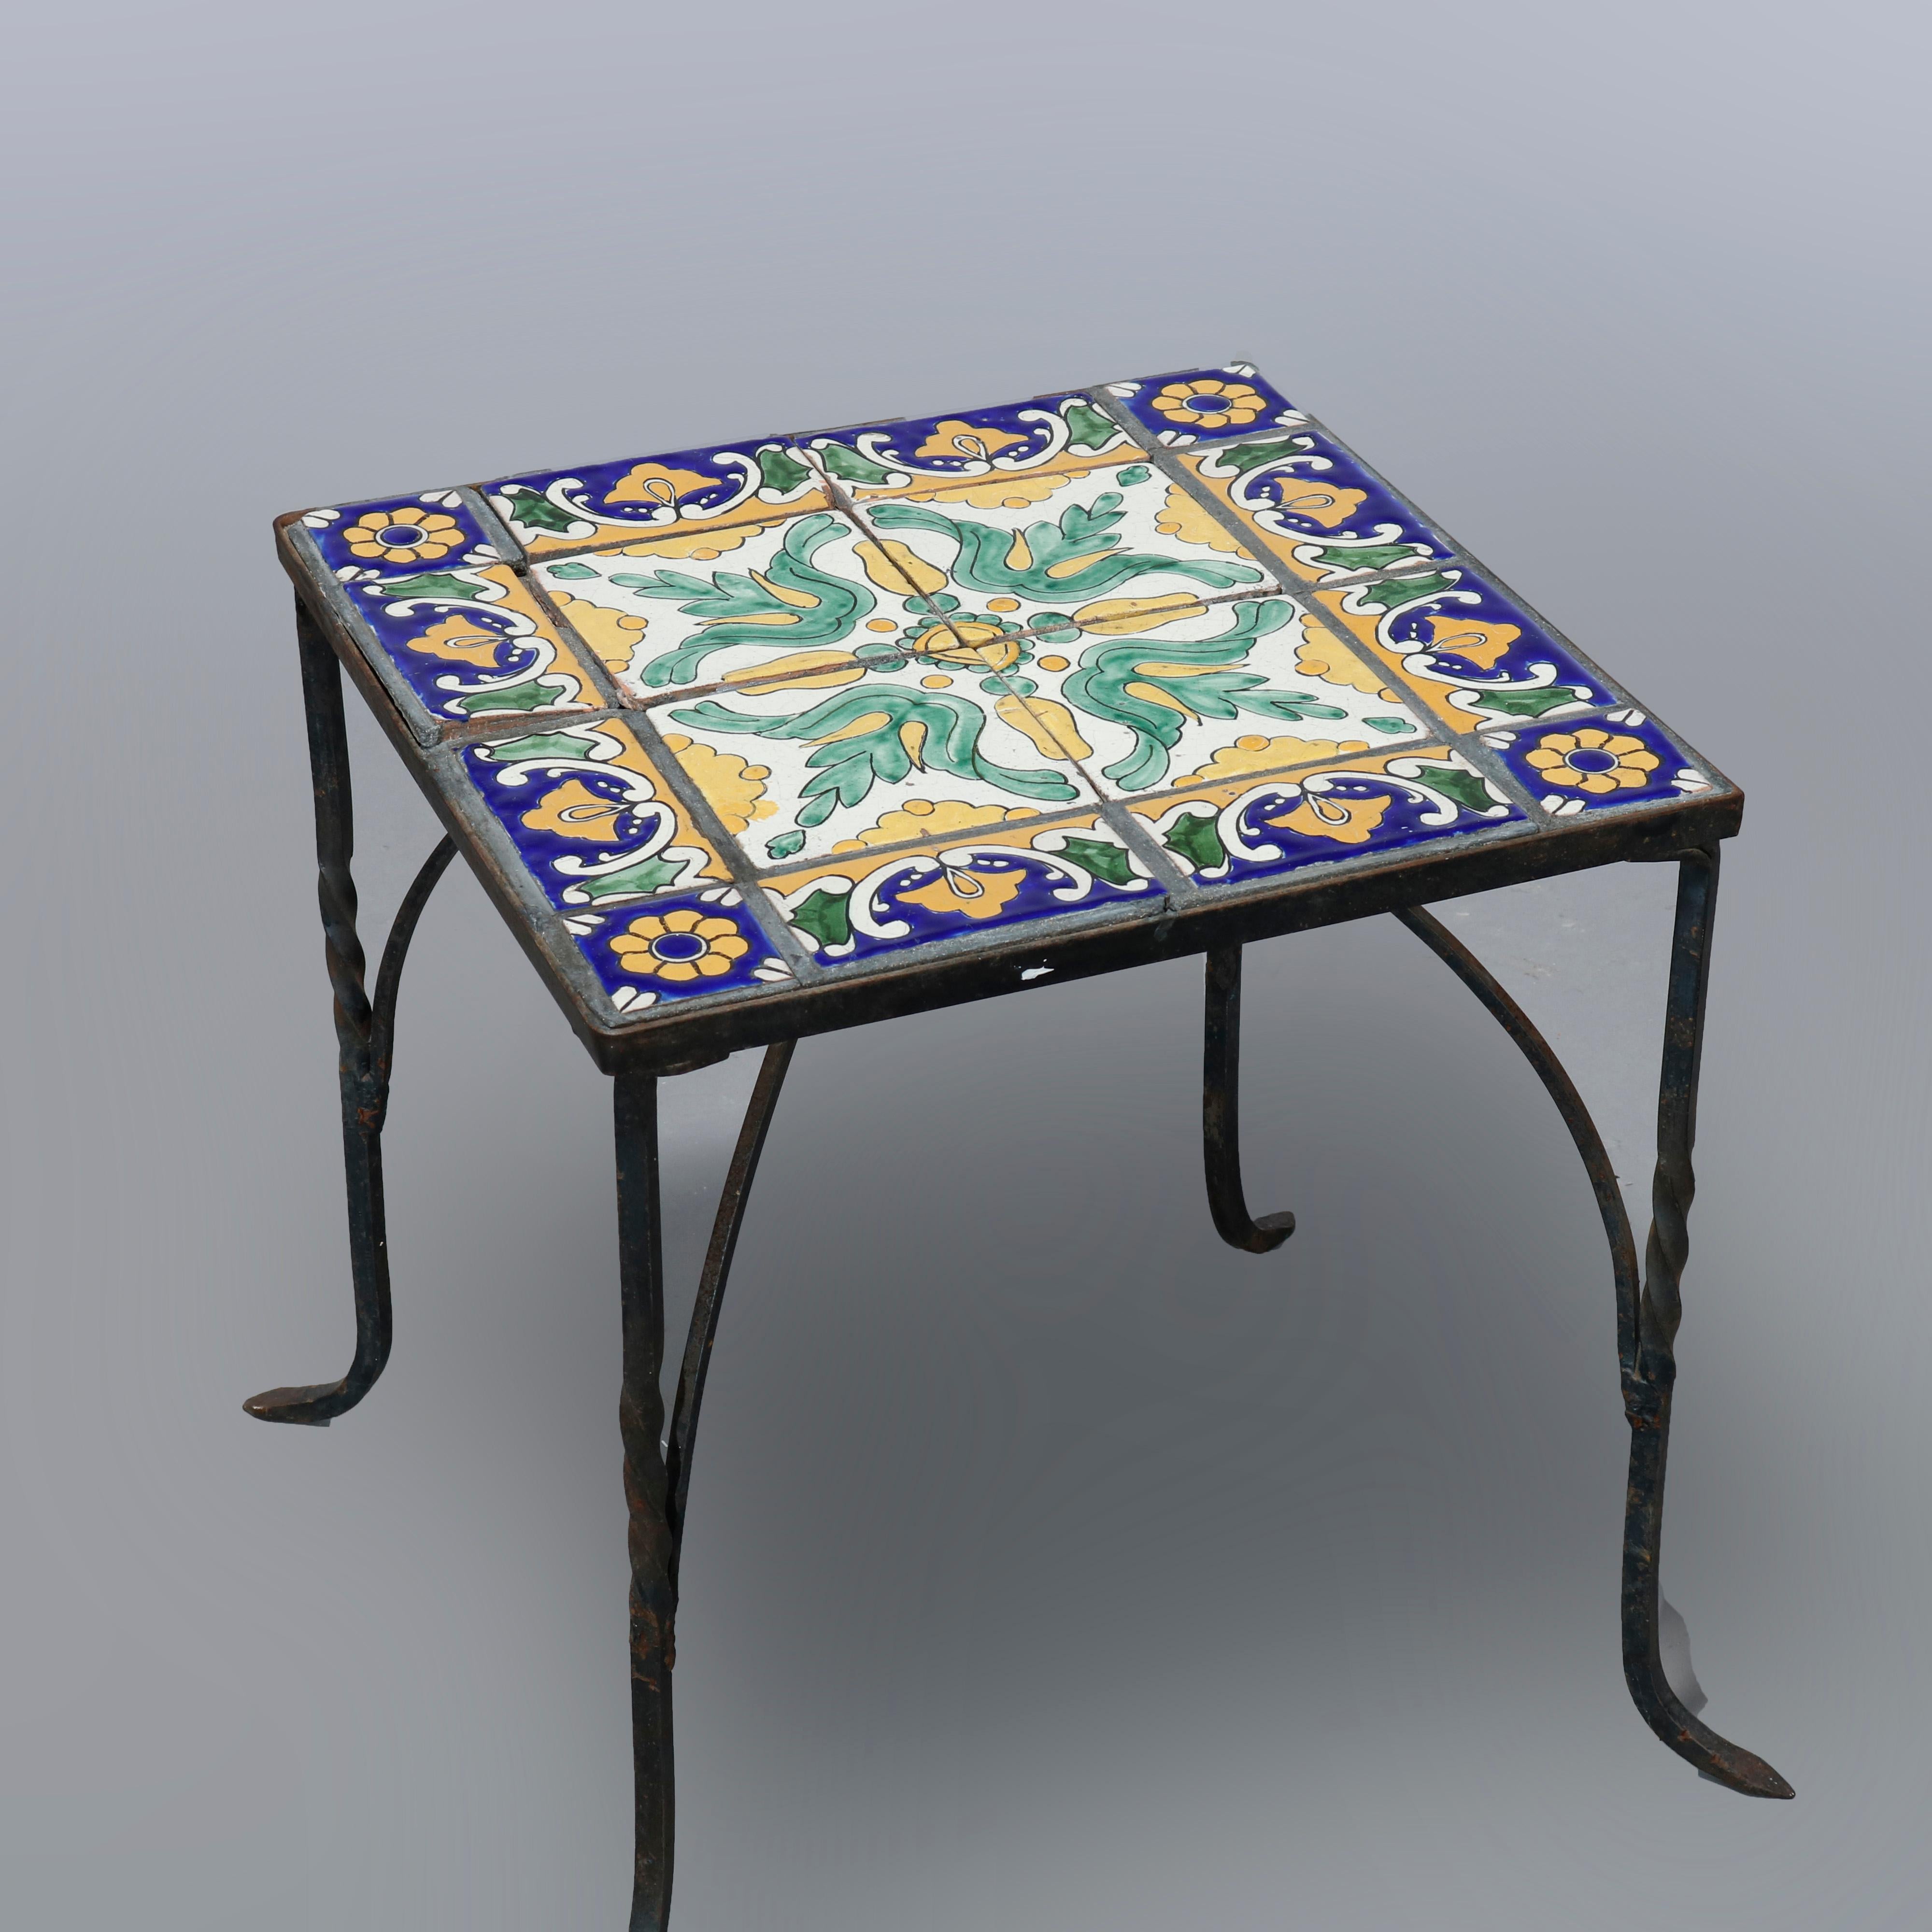 An antique Arts and Crafts side table in the manner of Oscar Bach offers tile top over wrought iron base having twist legs, c1930

Measures: 19.25